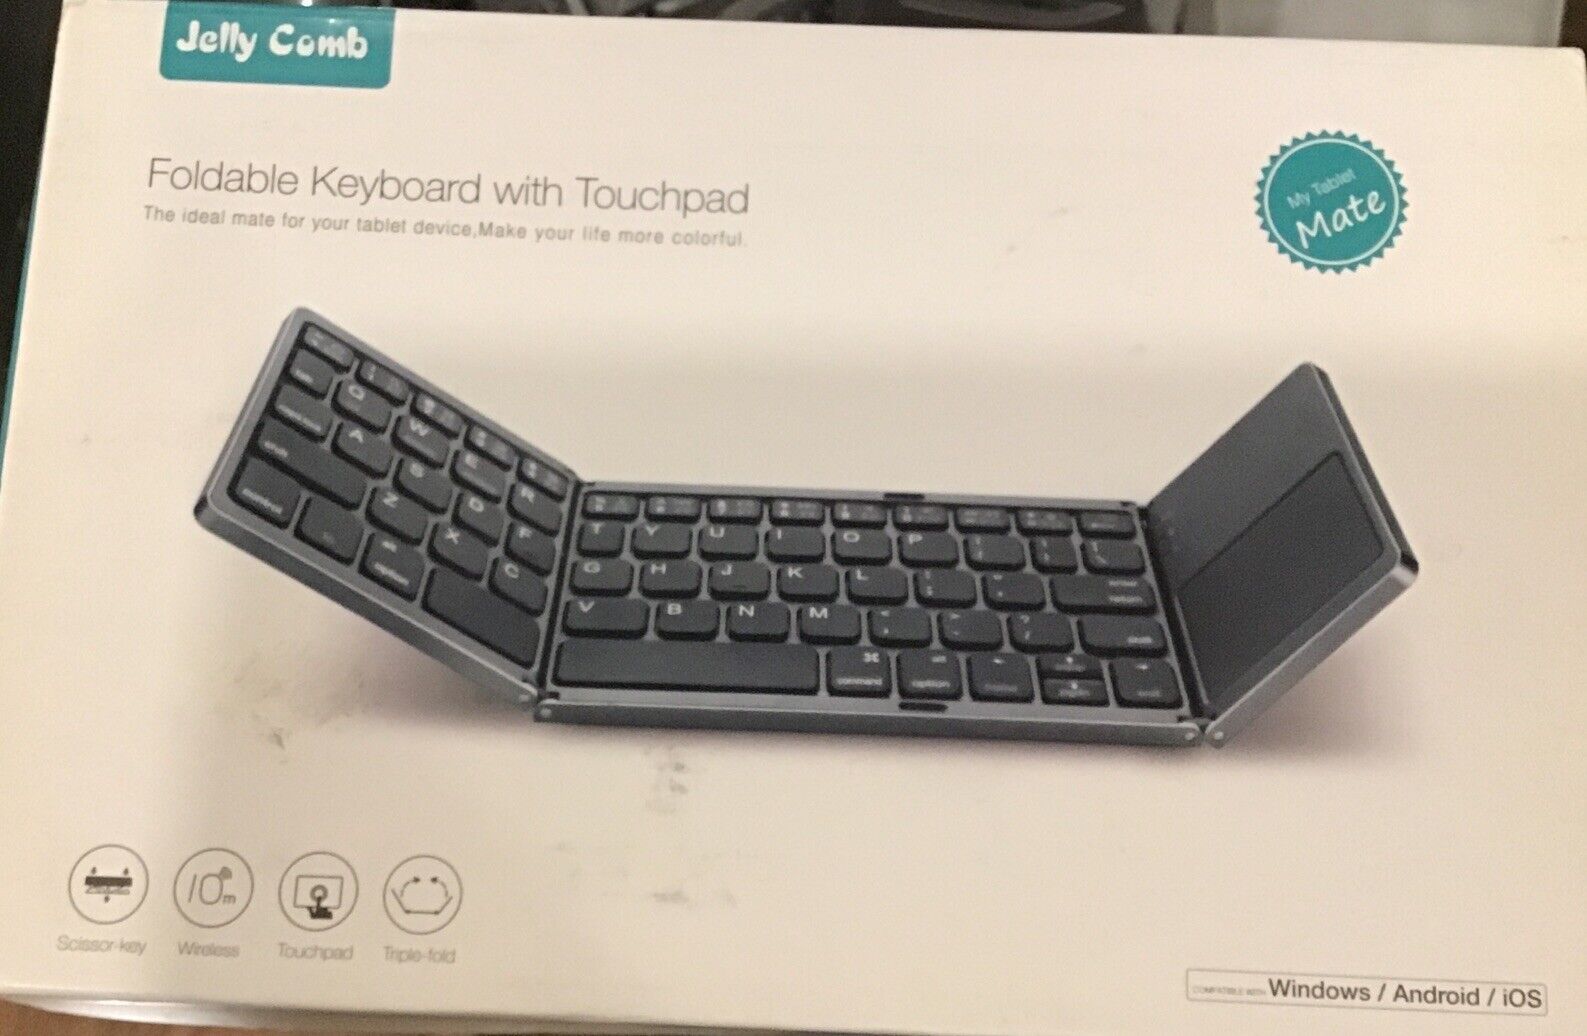 Foldable Bluetooth Keyboard with Touchpad Pocket Size for Windows, Android, iOS